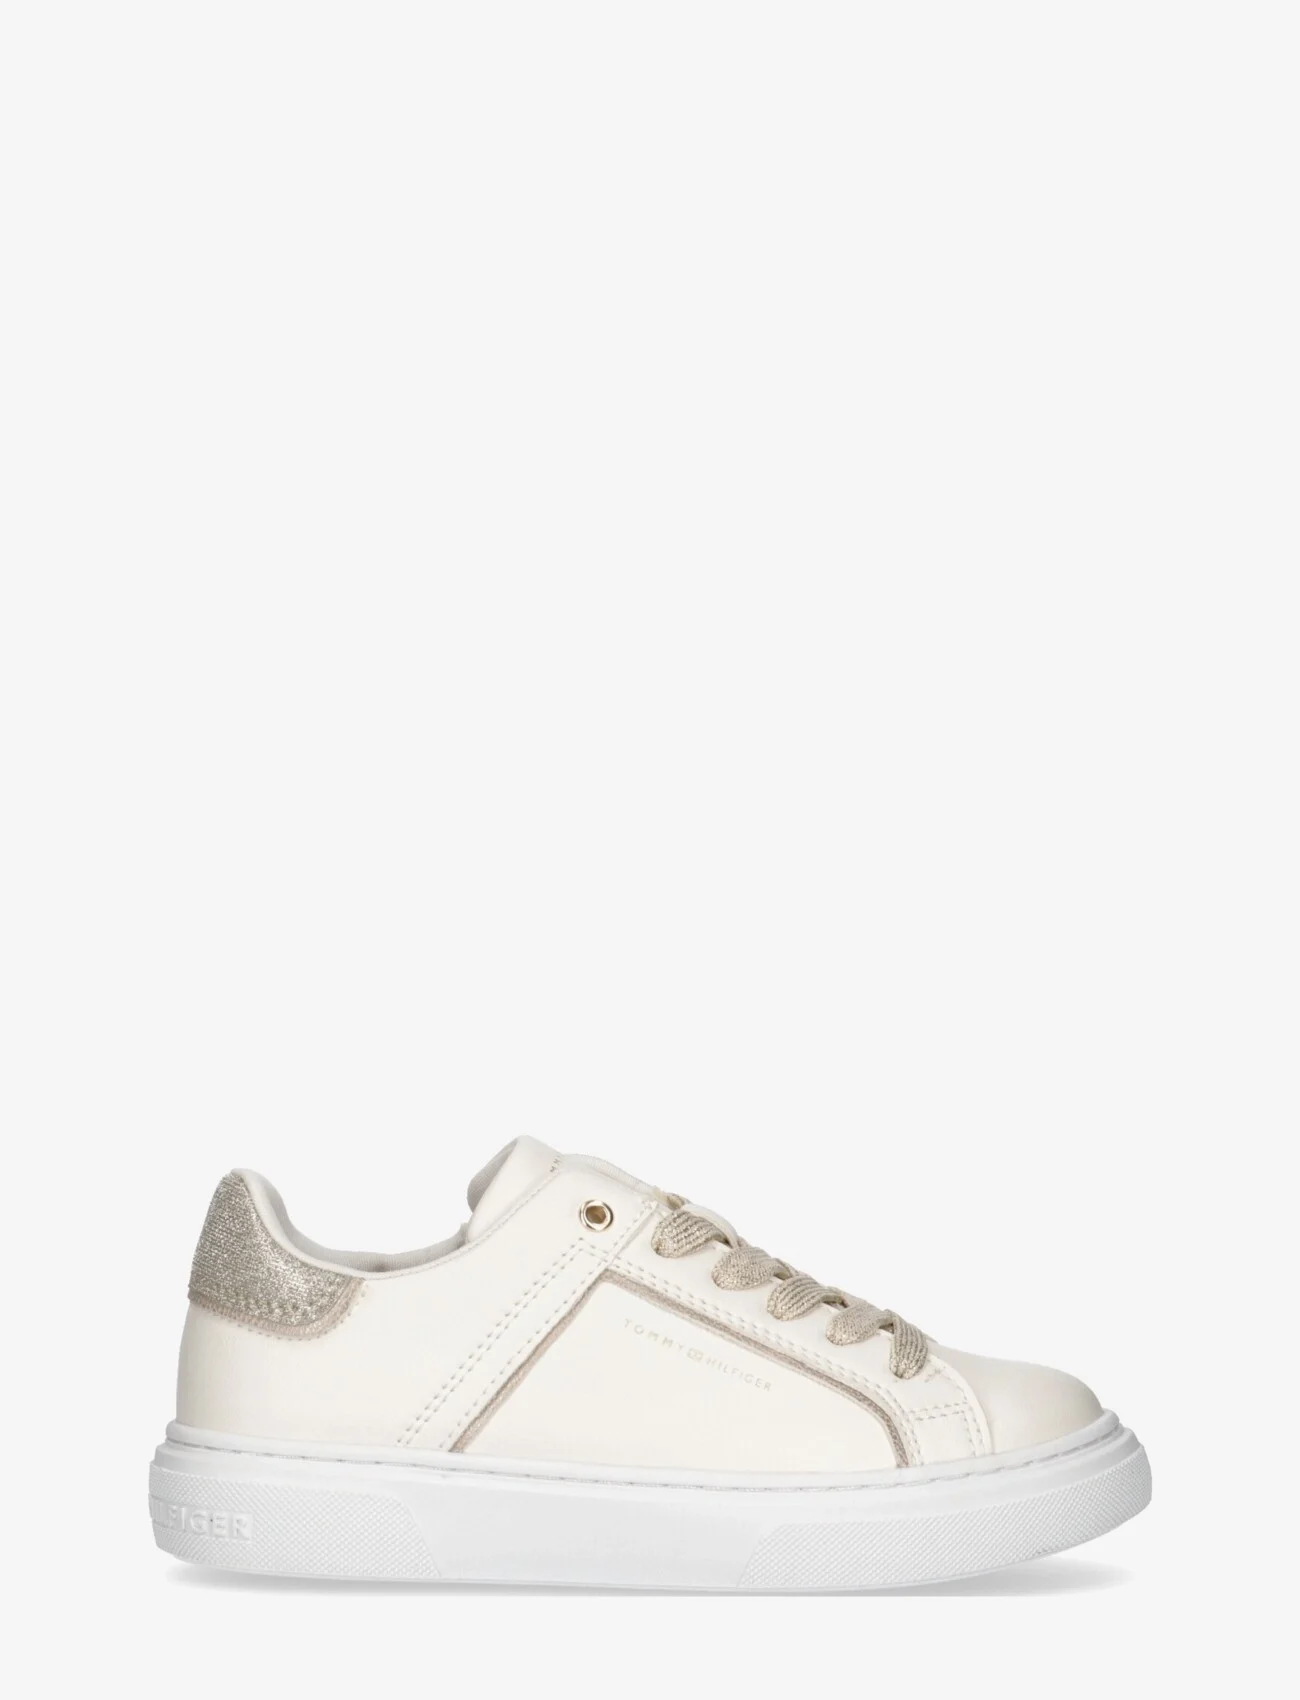 Tommy Hilfiger - LOW CUT LACE-UP SNEAKER - sommerschnäppchen - off white/platinum - 1